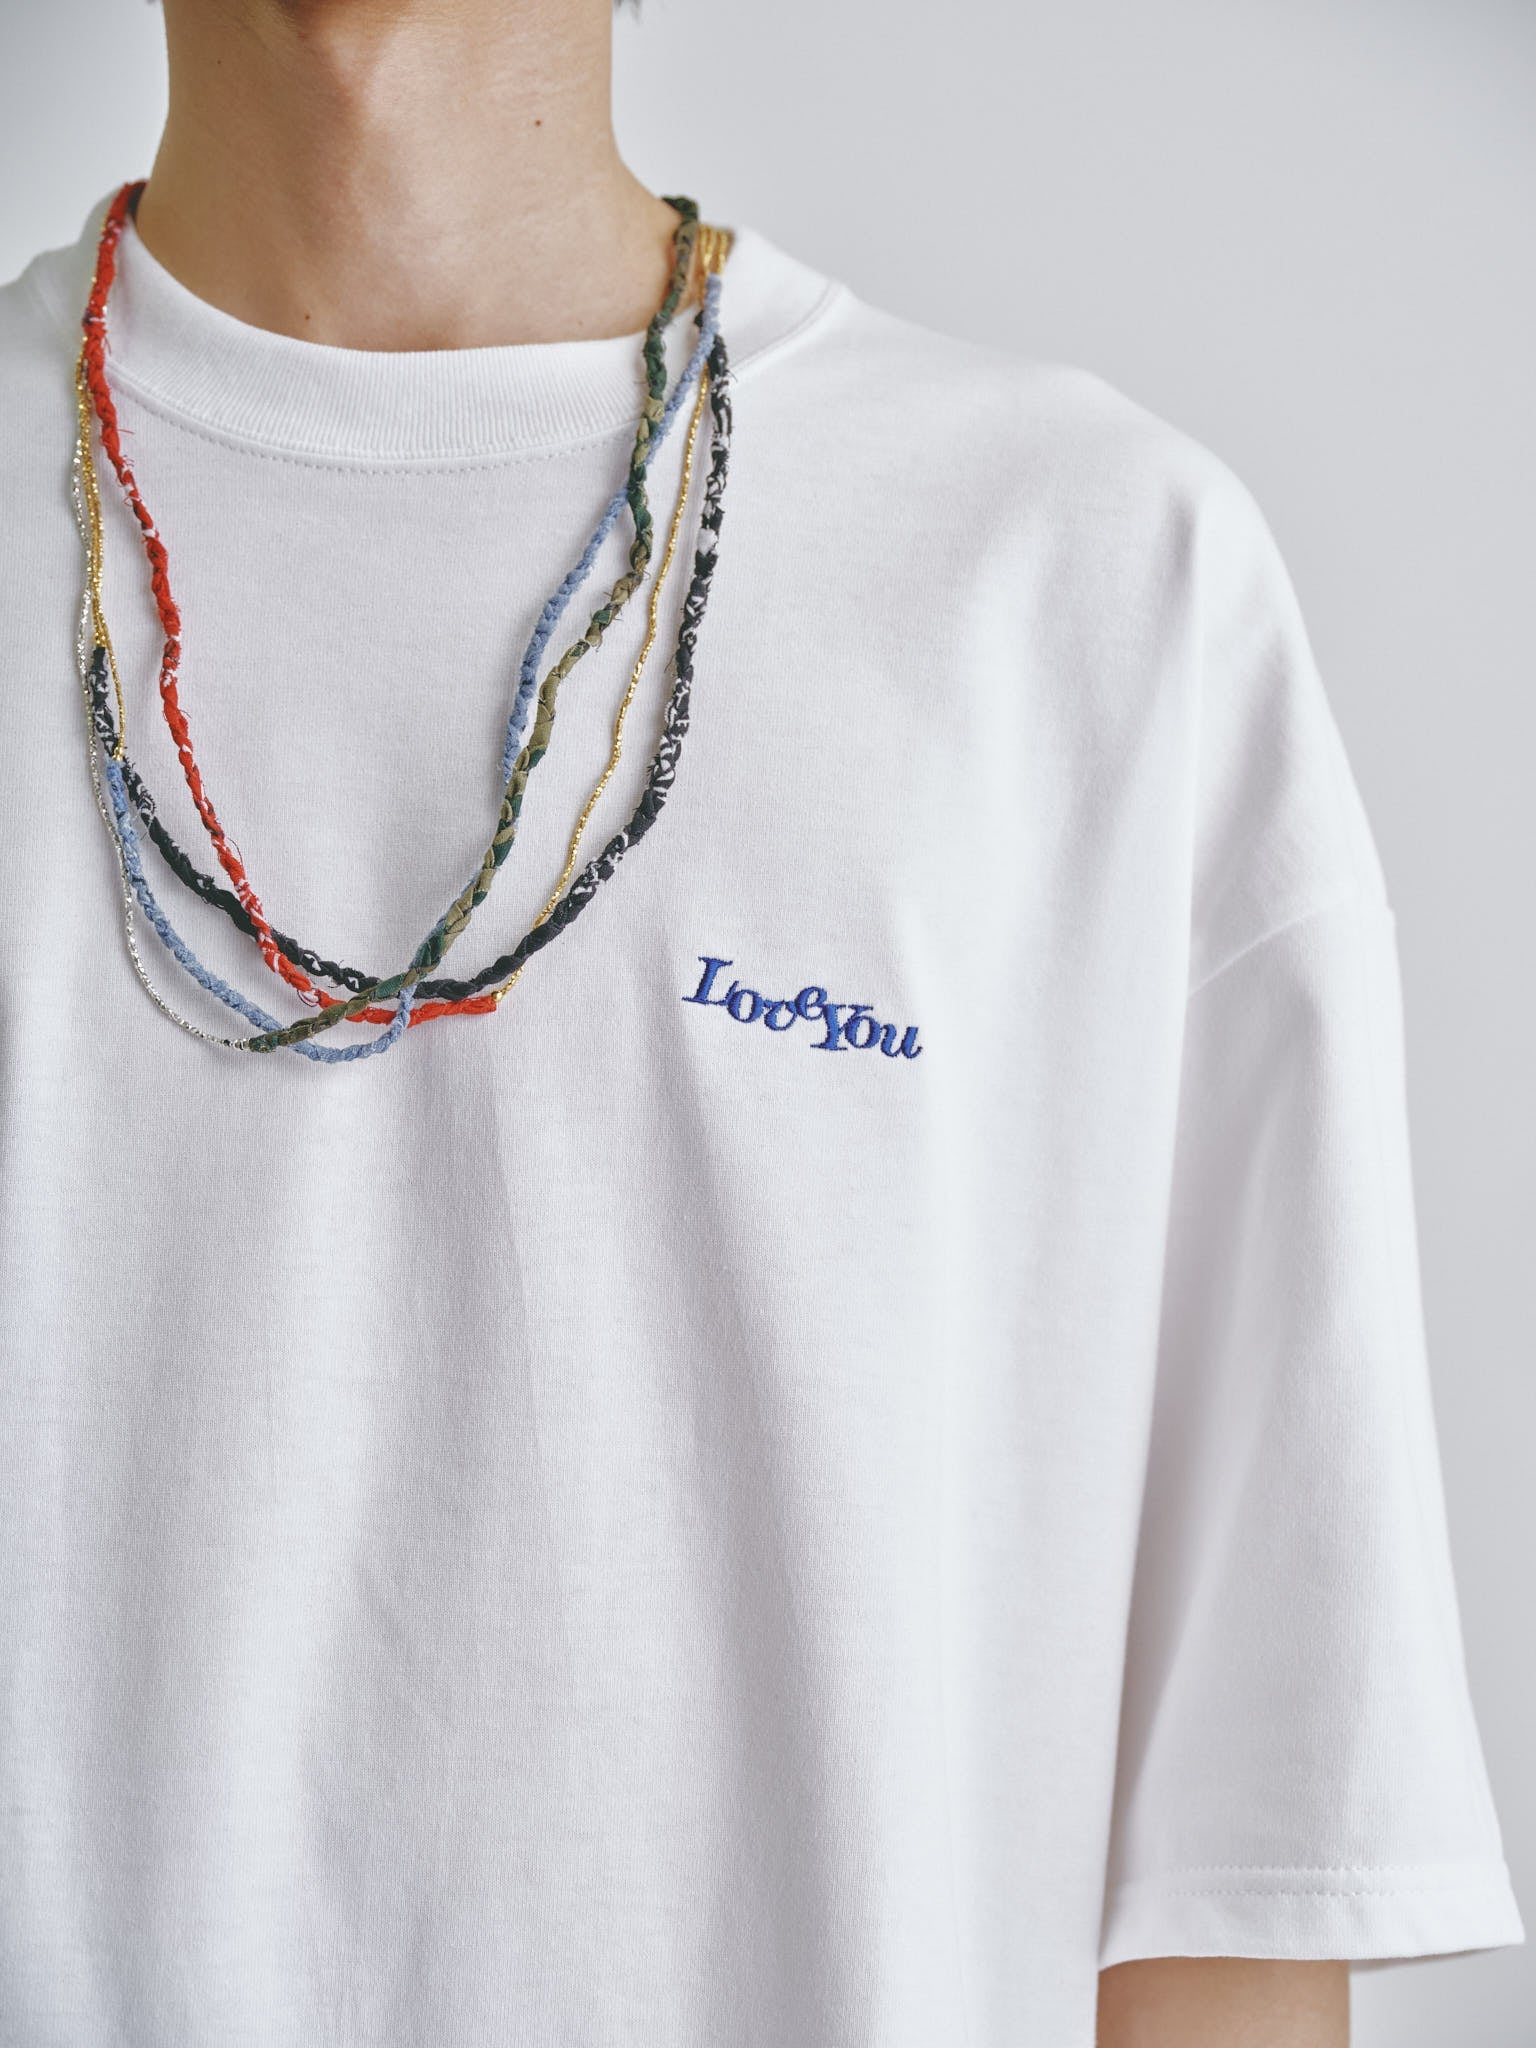 Love you embroidery tee